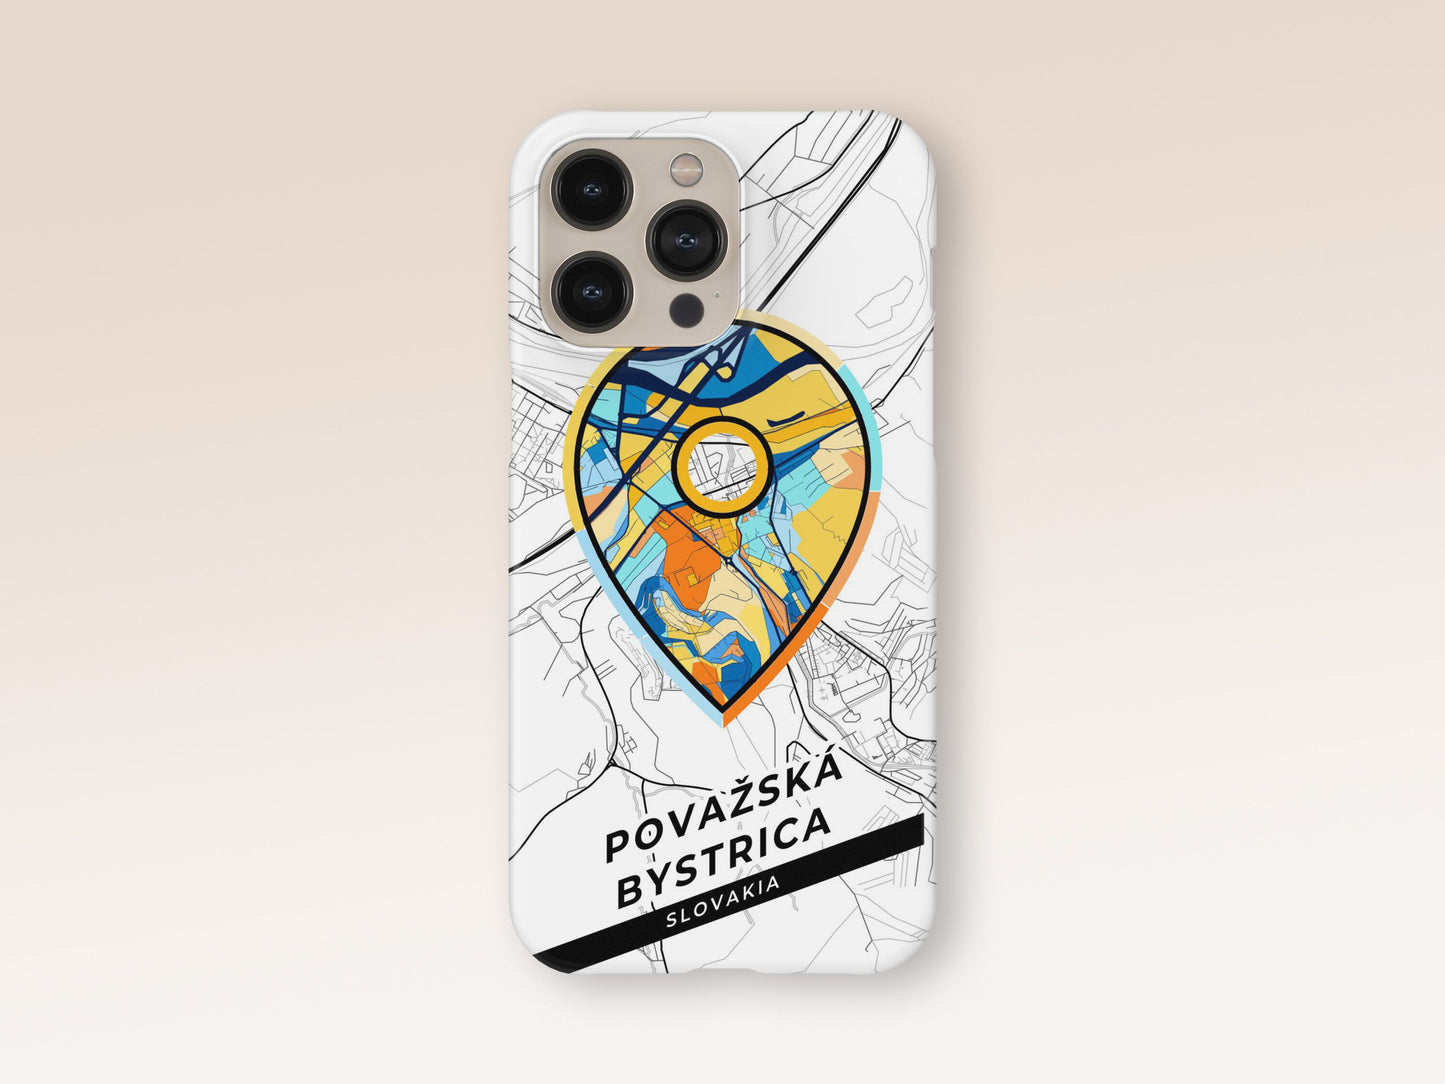 Považská Bystrica Slovakia slim phone case with colorful icon. Birthday, wedding or housewarming gift. Couple match cases. 1